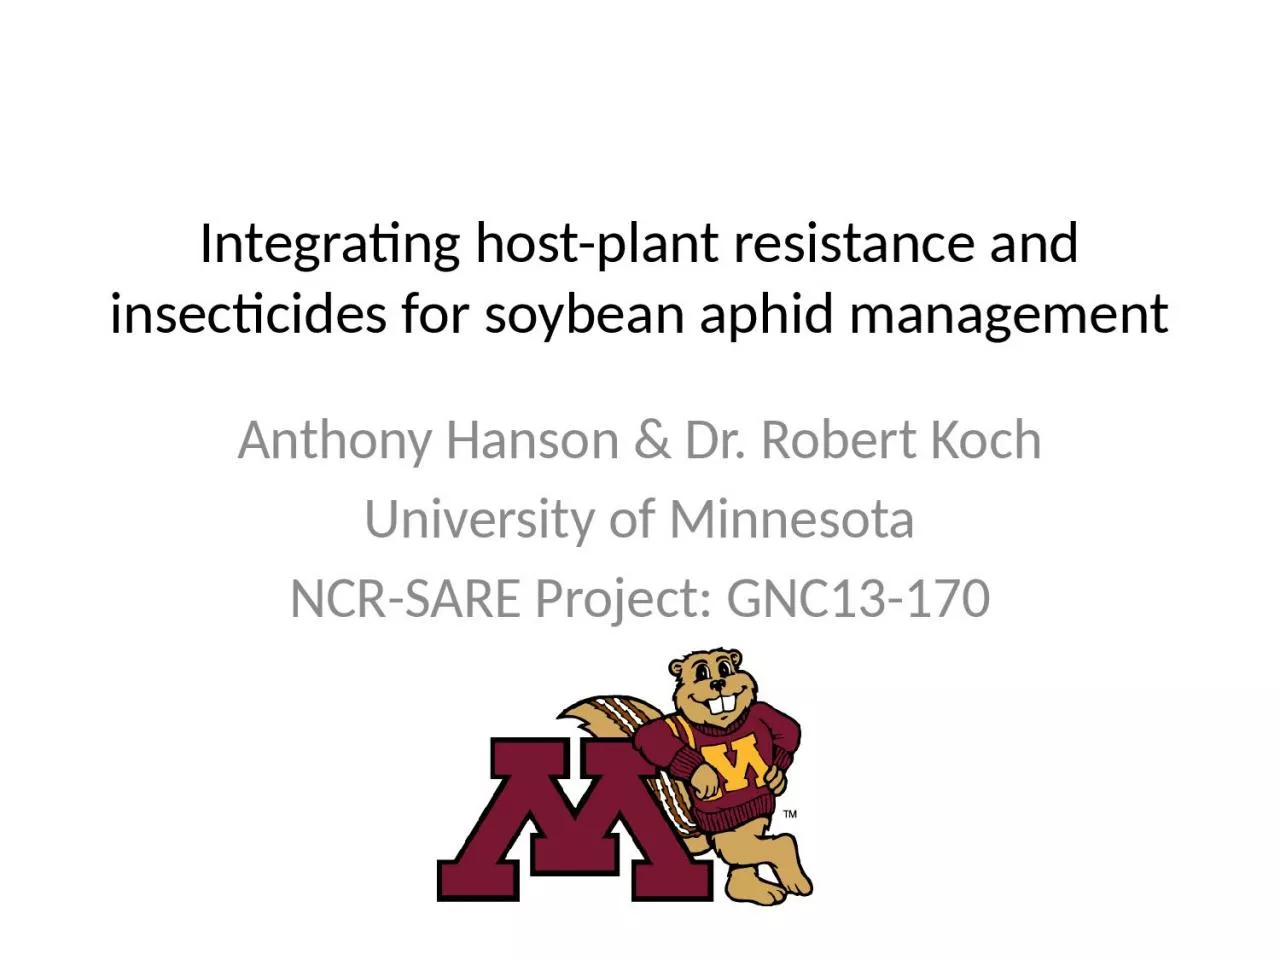 Integrating host-plant resistance and insecticides for soybean aphid management